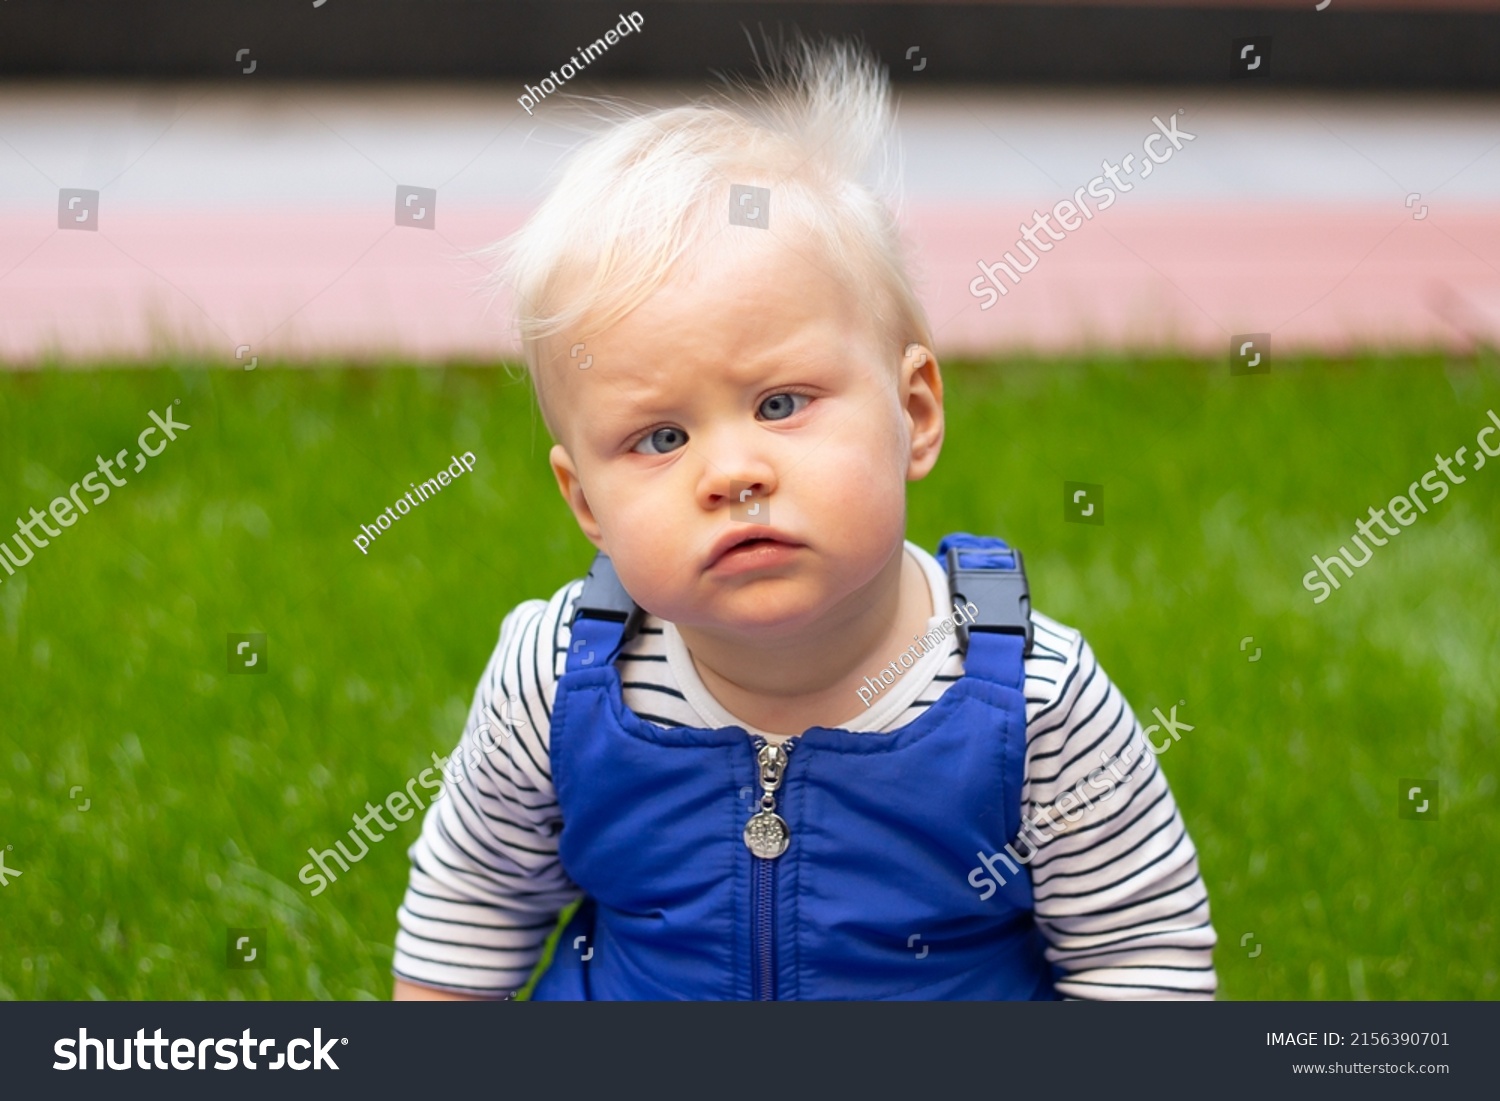 little baby boy portrait of child outdoor with strabismus eyes #2156390701